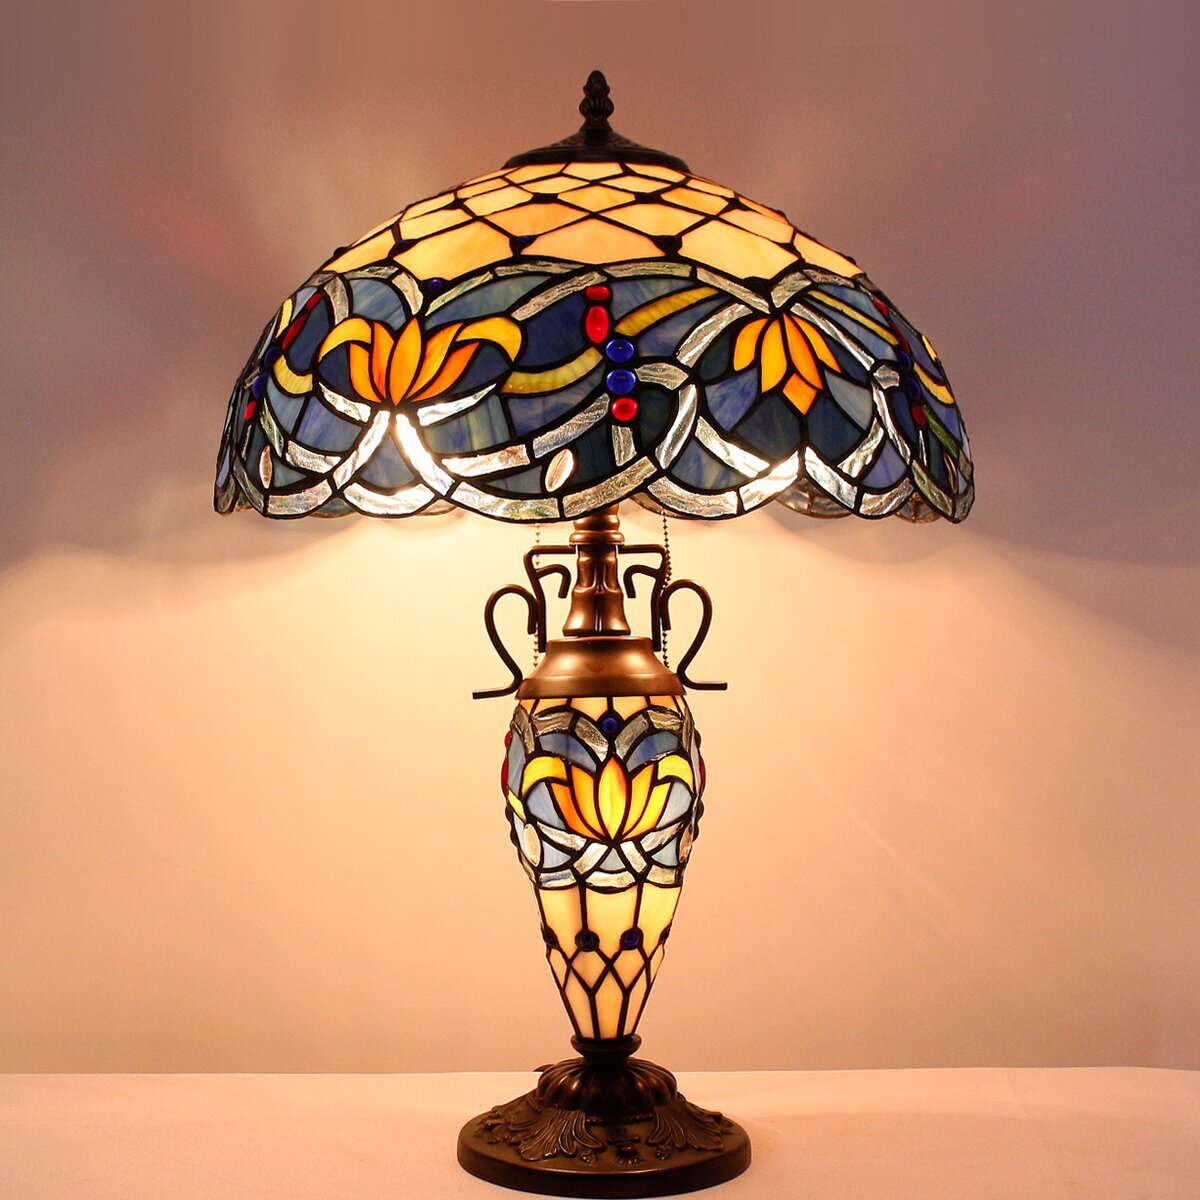 Tiffany Lamp With Nightlight Rustic Large Blue Stained Glass Lotus Table Lamp Desk 24